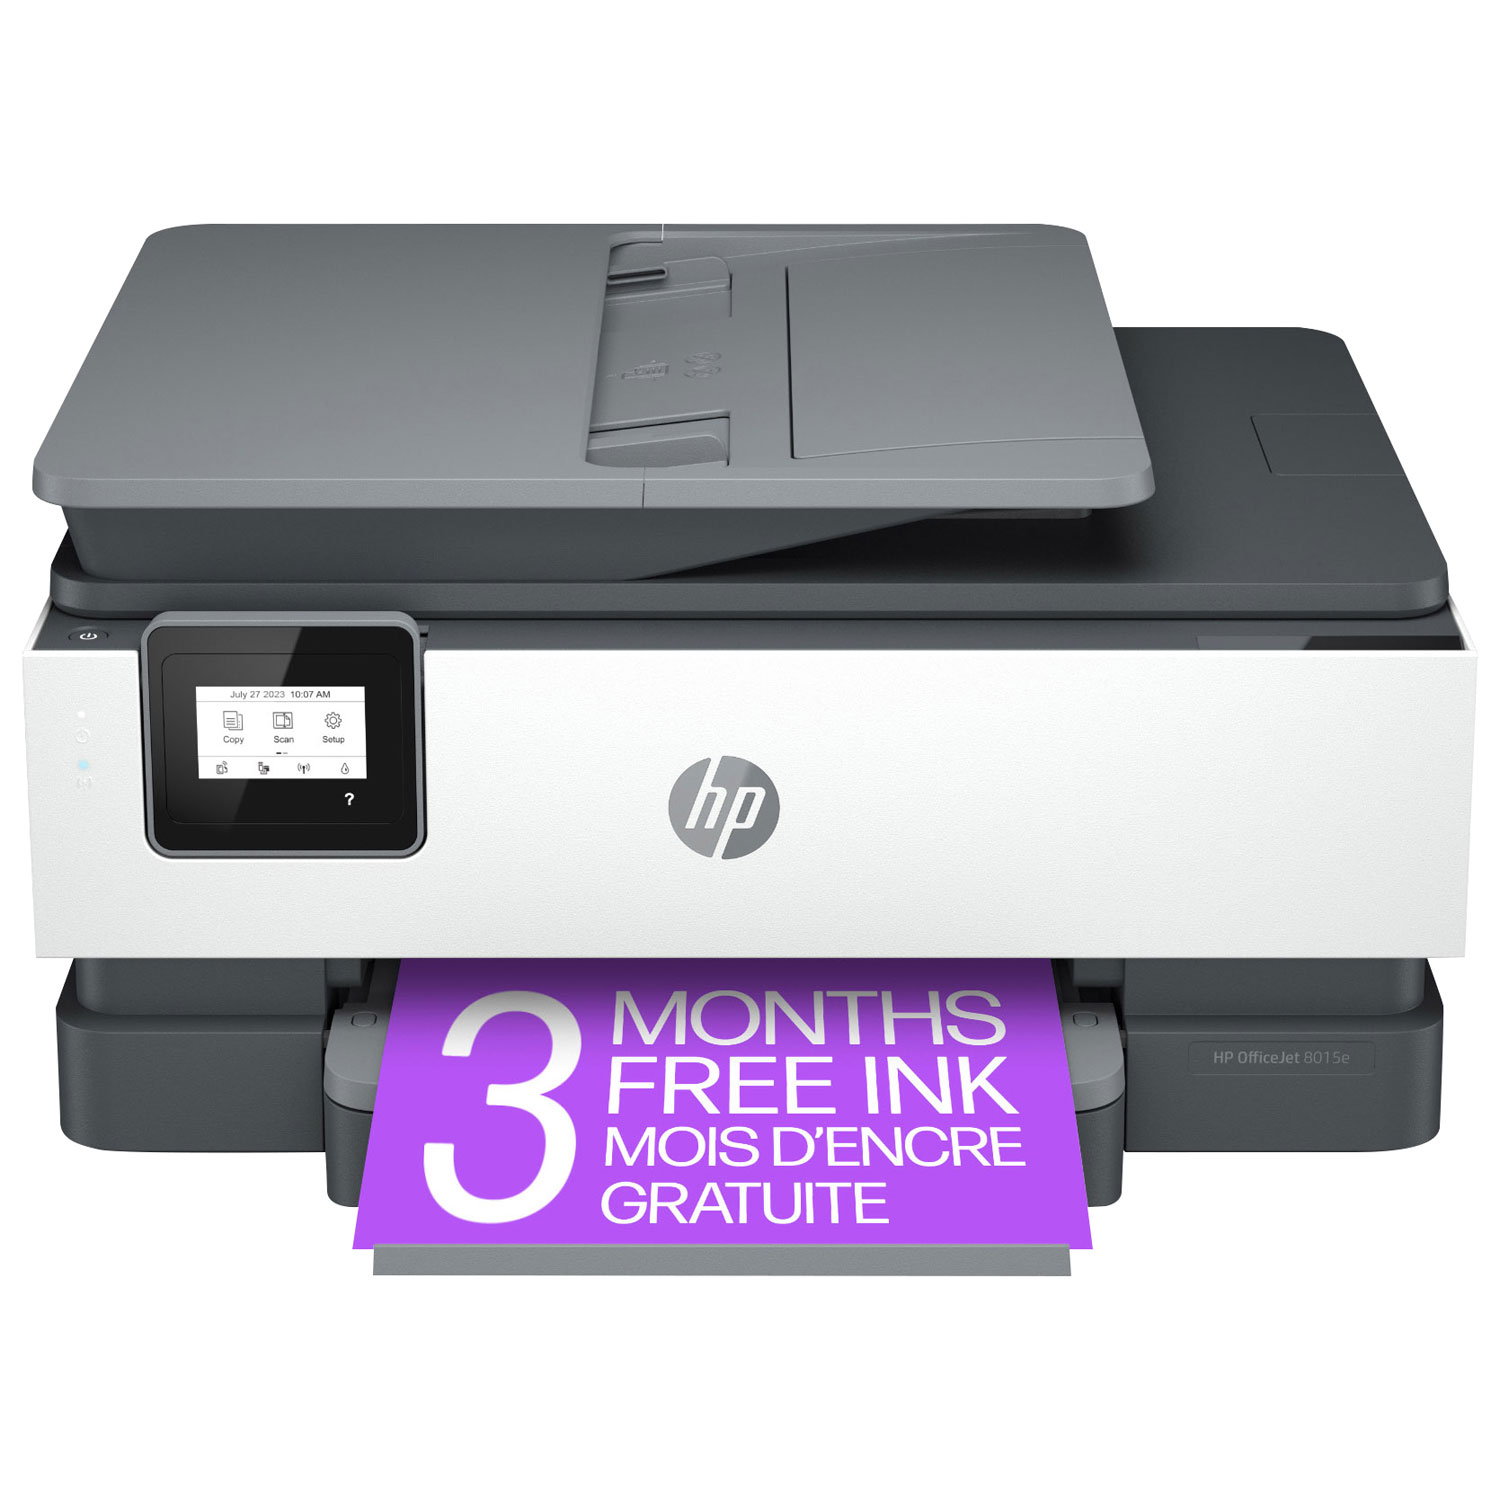 HP OfficeJet 8015e Wireless All-In-One Inkjet Printer - HP Instant Ink 3-Month Free Trial Included*